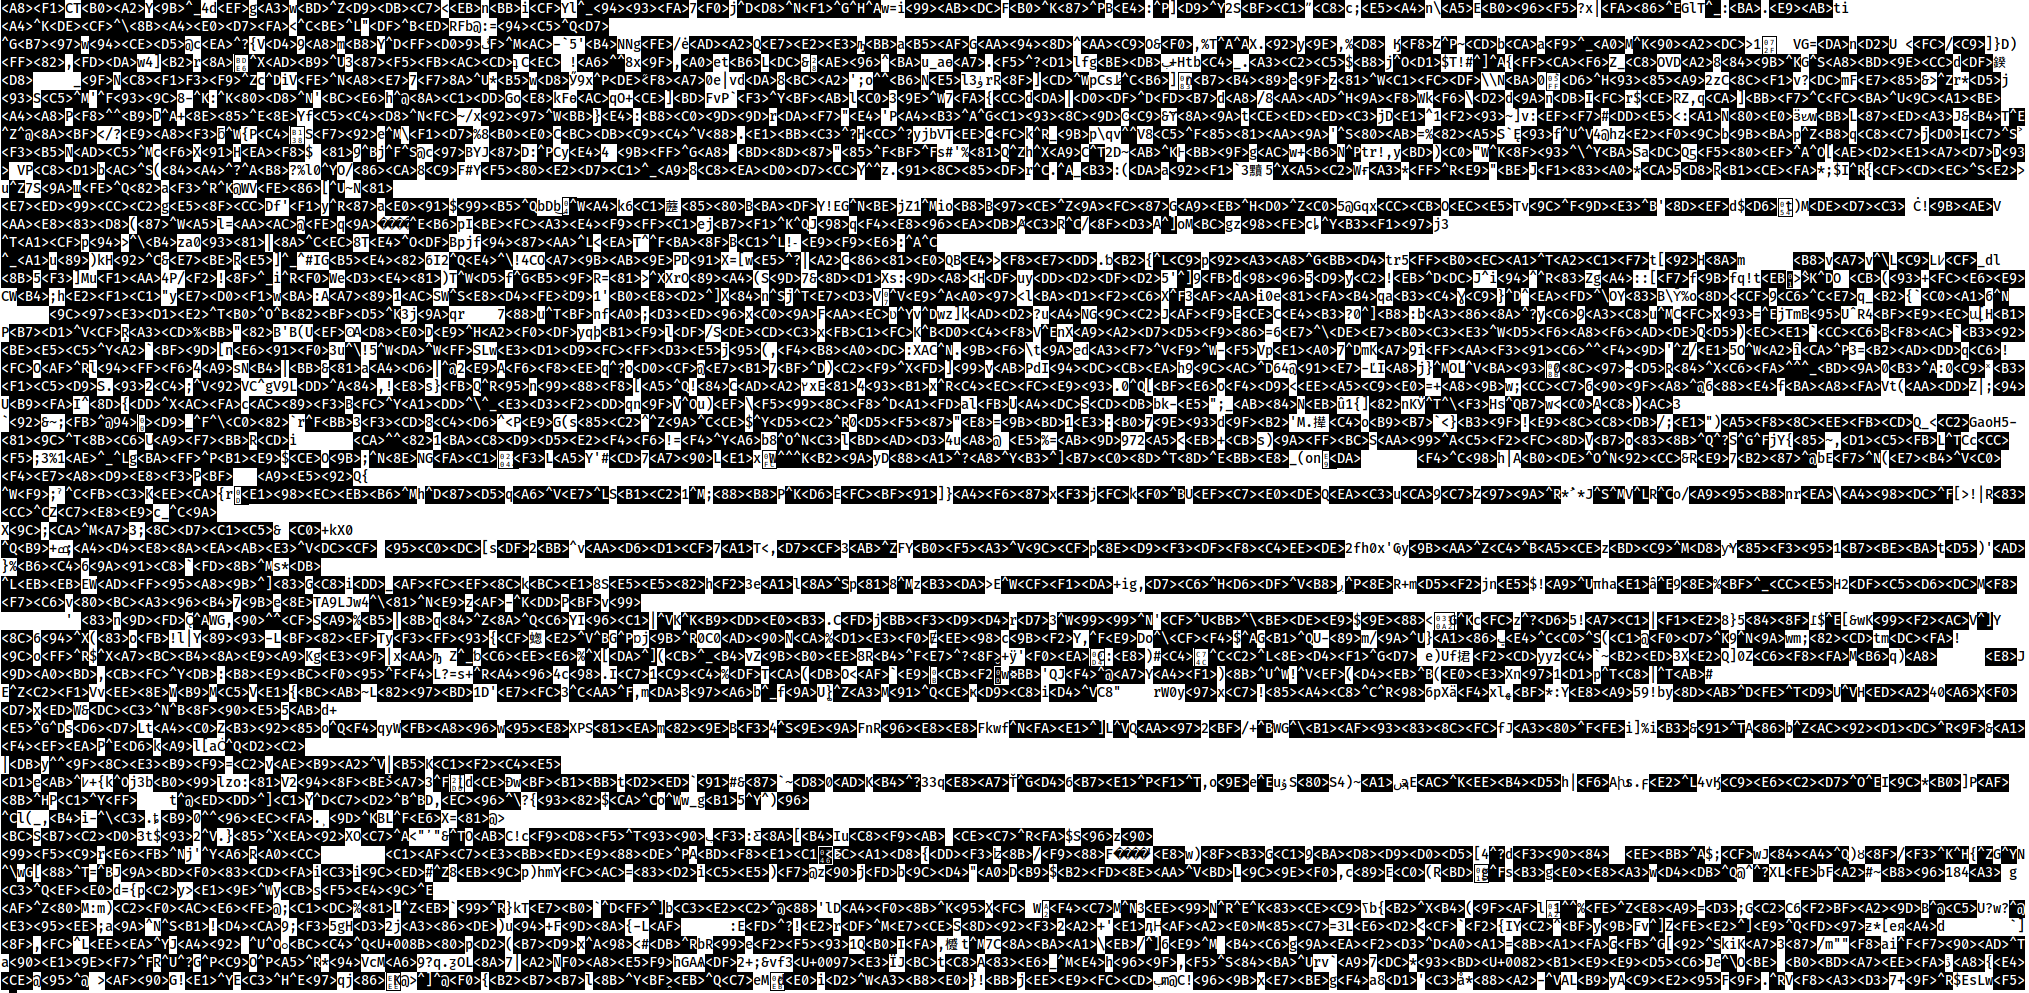 This is how art looks like in a text editor